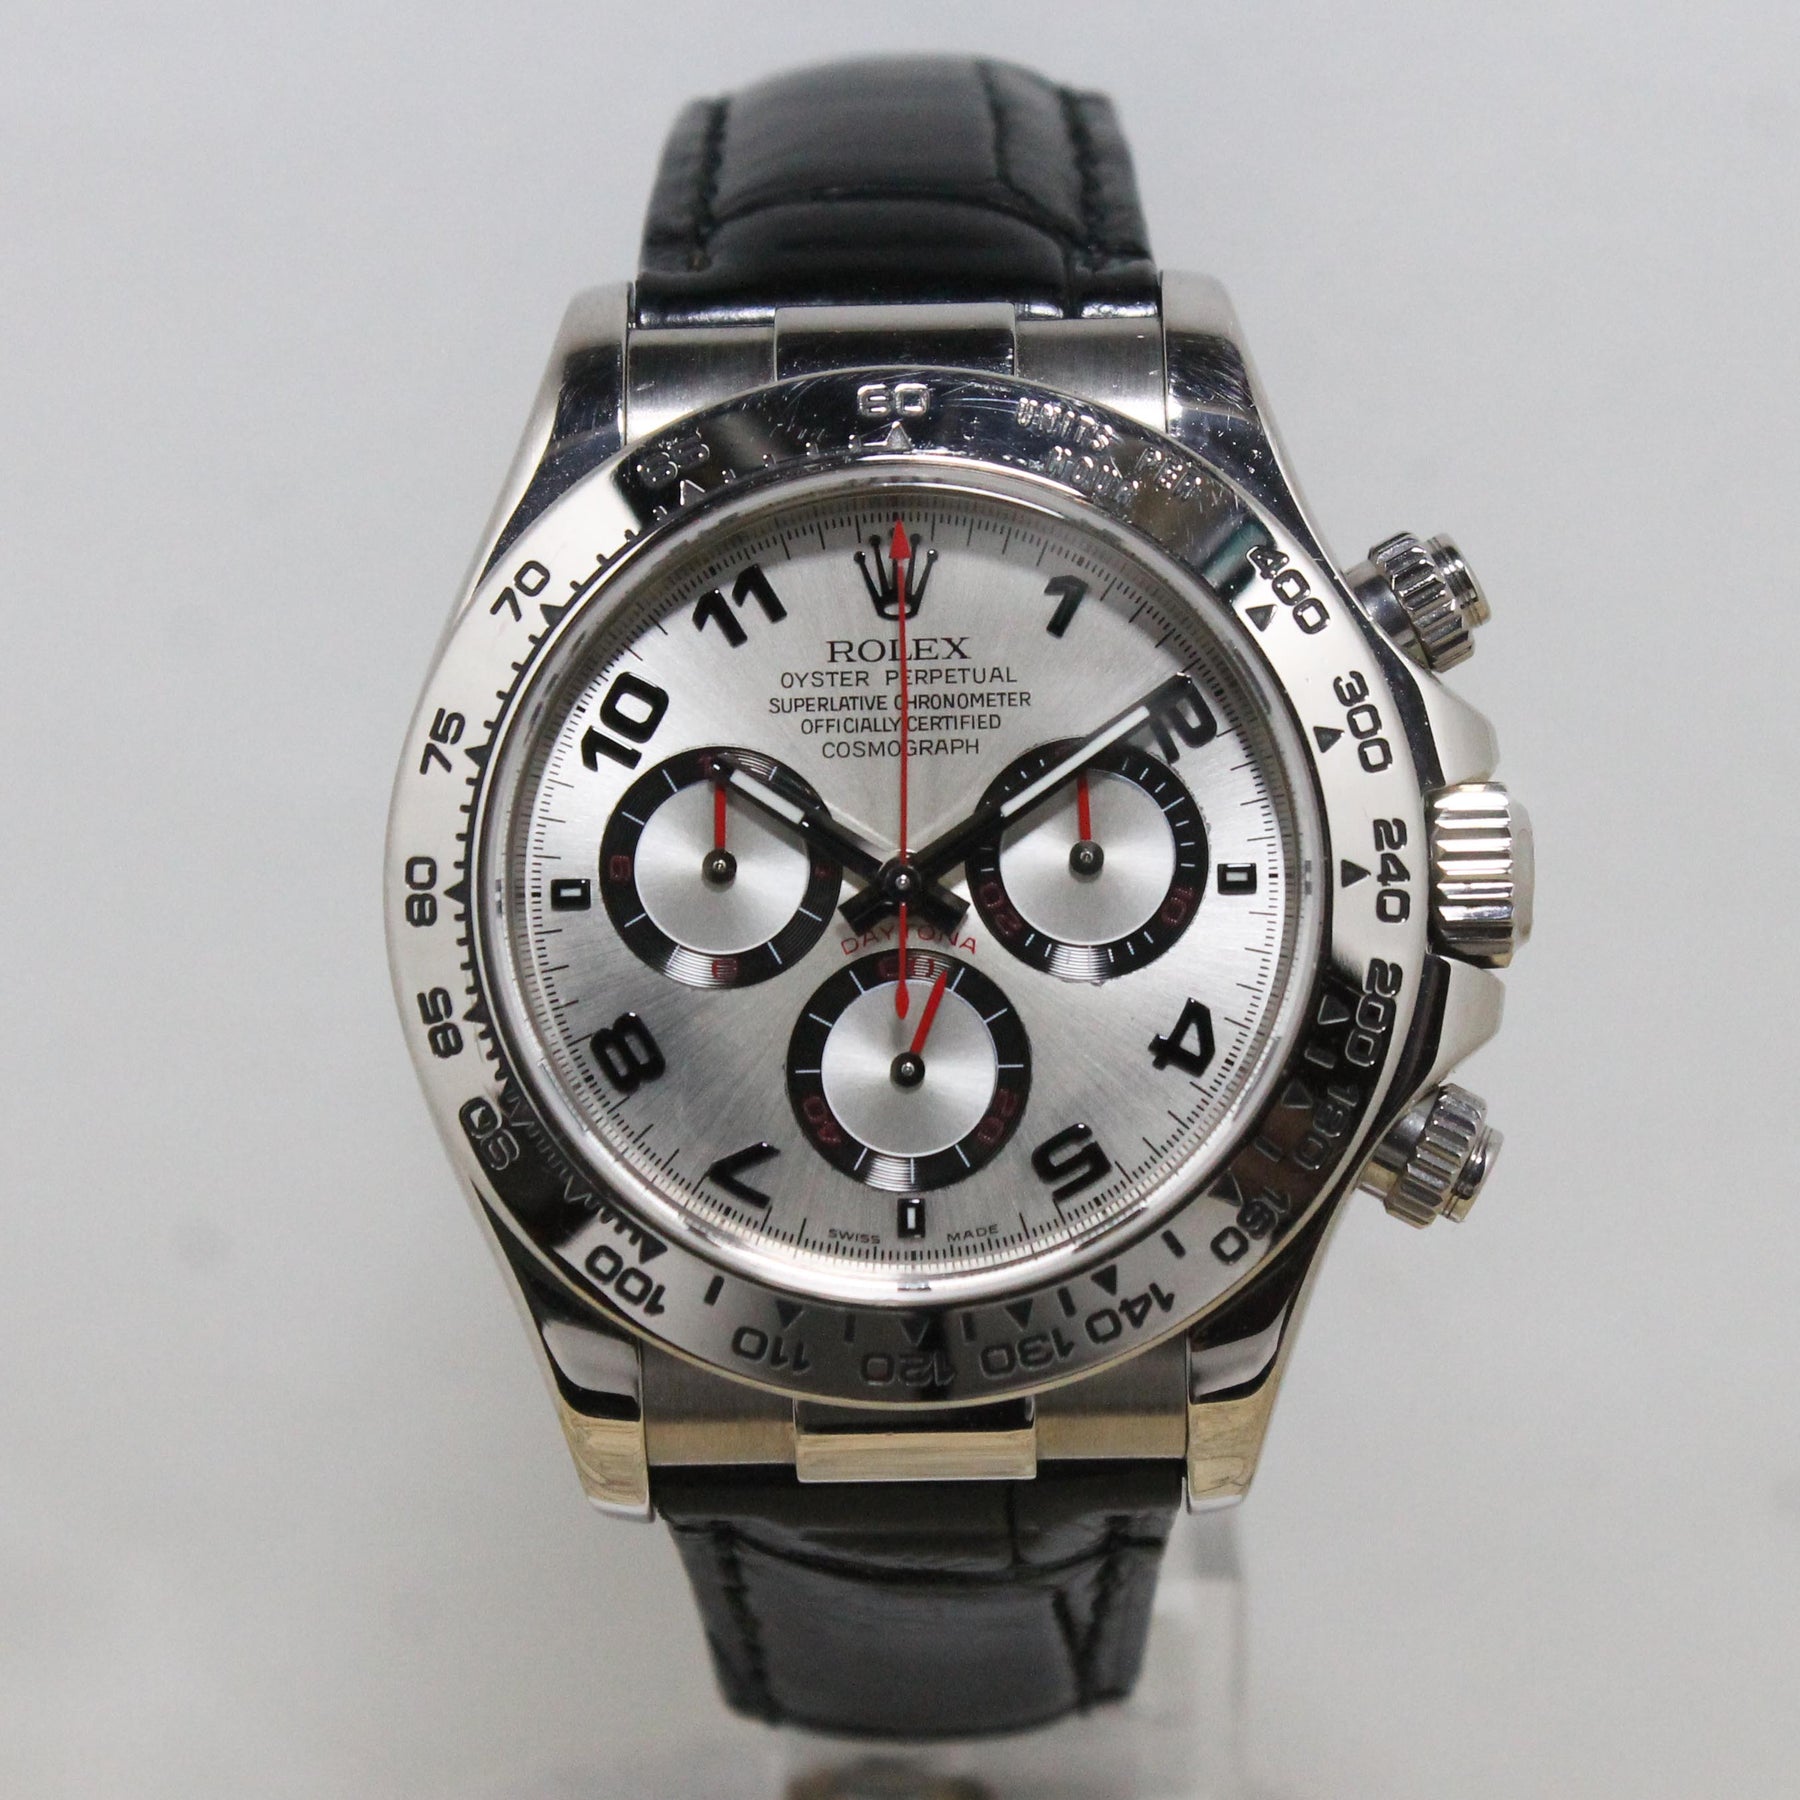 2003 Rolex Daytona Racing Dial Ref. 116519 (with Papers)